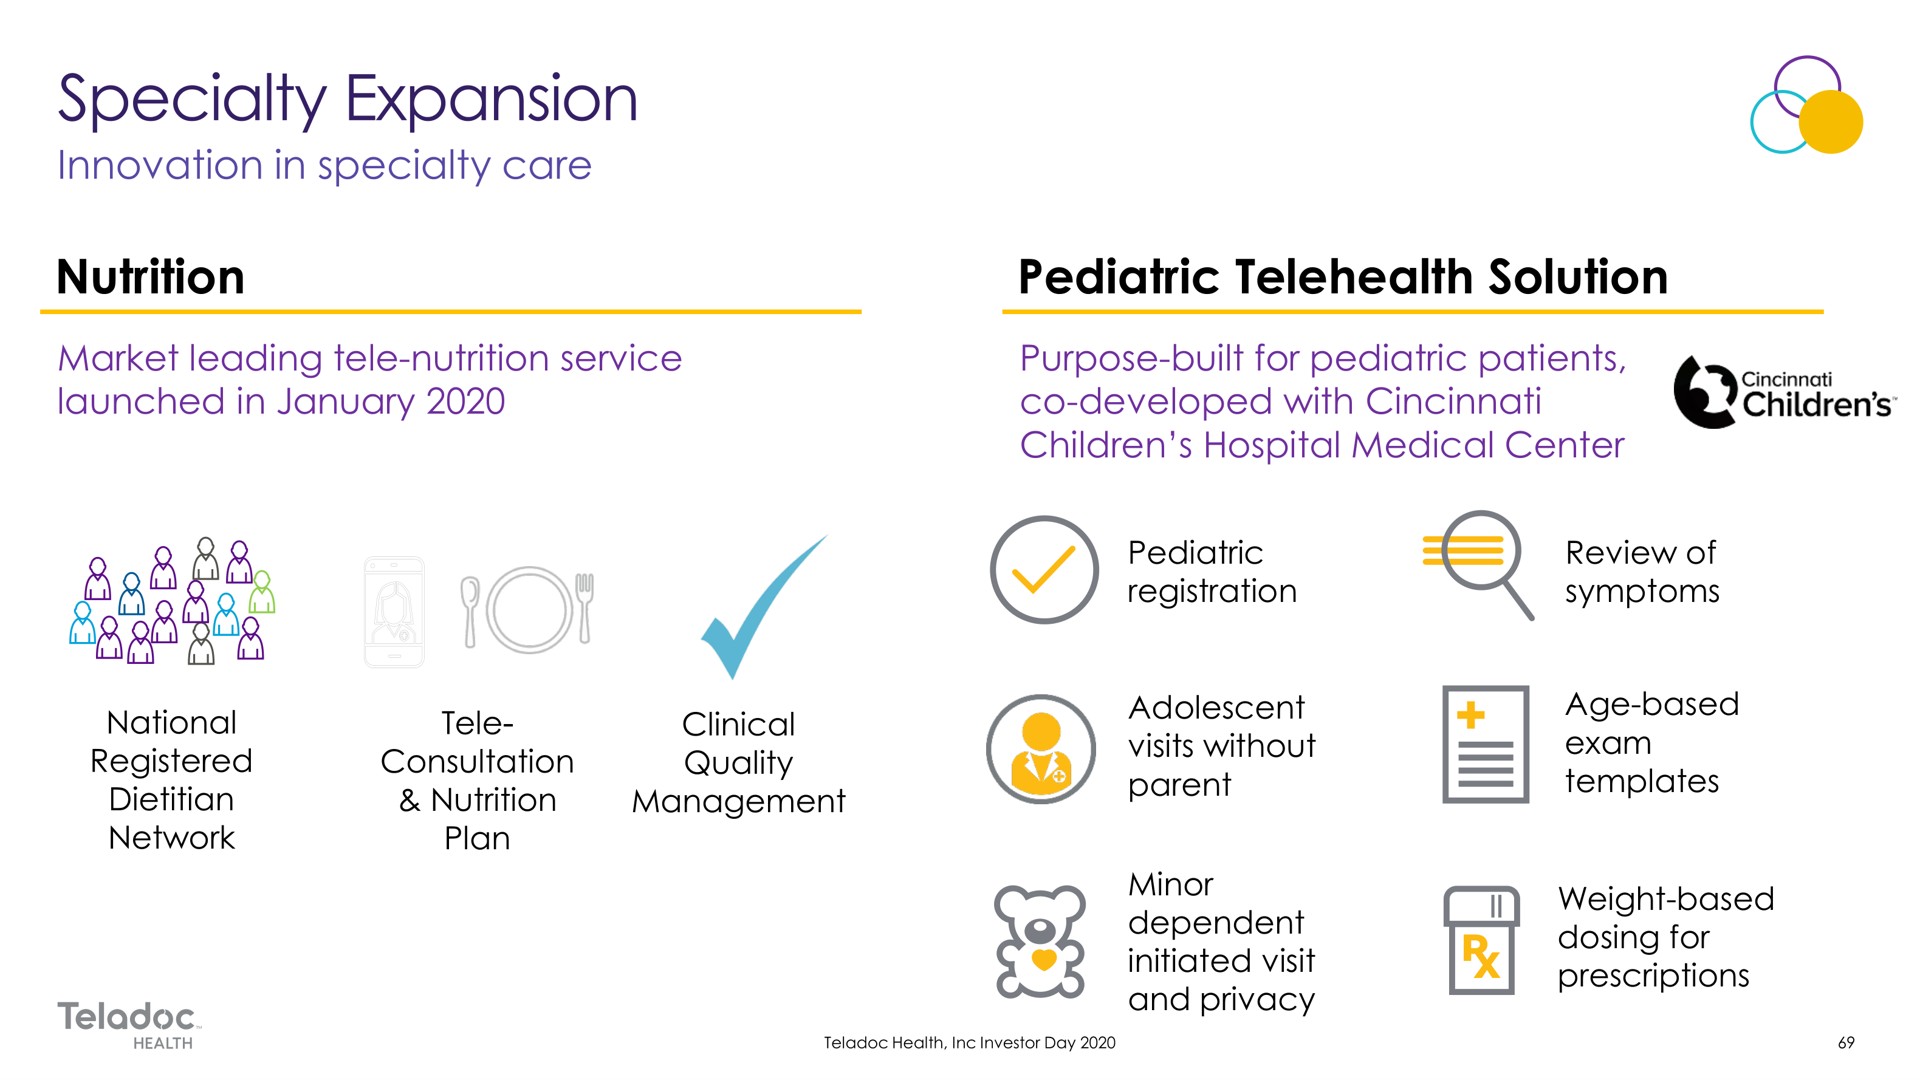 nutrition market leading tele nutrition service launched in pediatric solution purpose built for pediatric patients developed with children hospital medical center pediatric registration adolescent visits without parent minor dependent initiated visit and privacy review of symptoms age based exam templates weight based dosing for prescriptions specialty | Teladoc